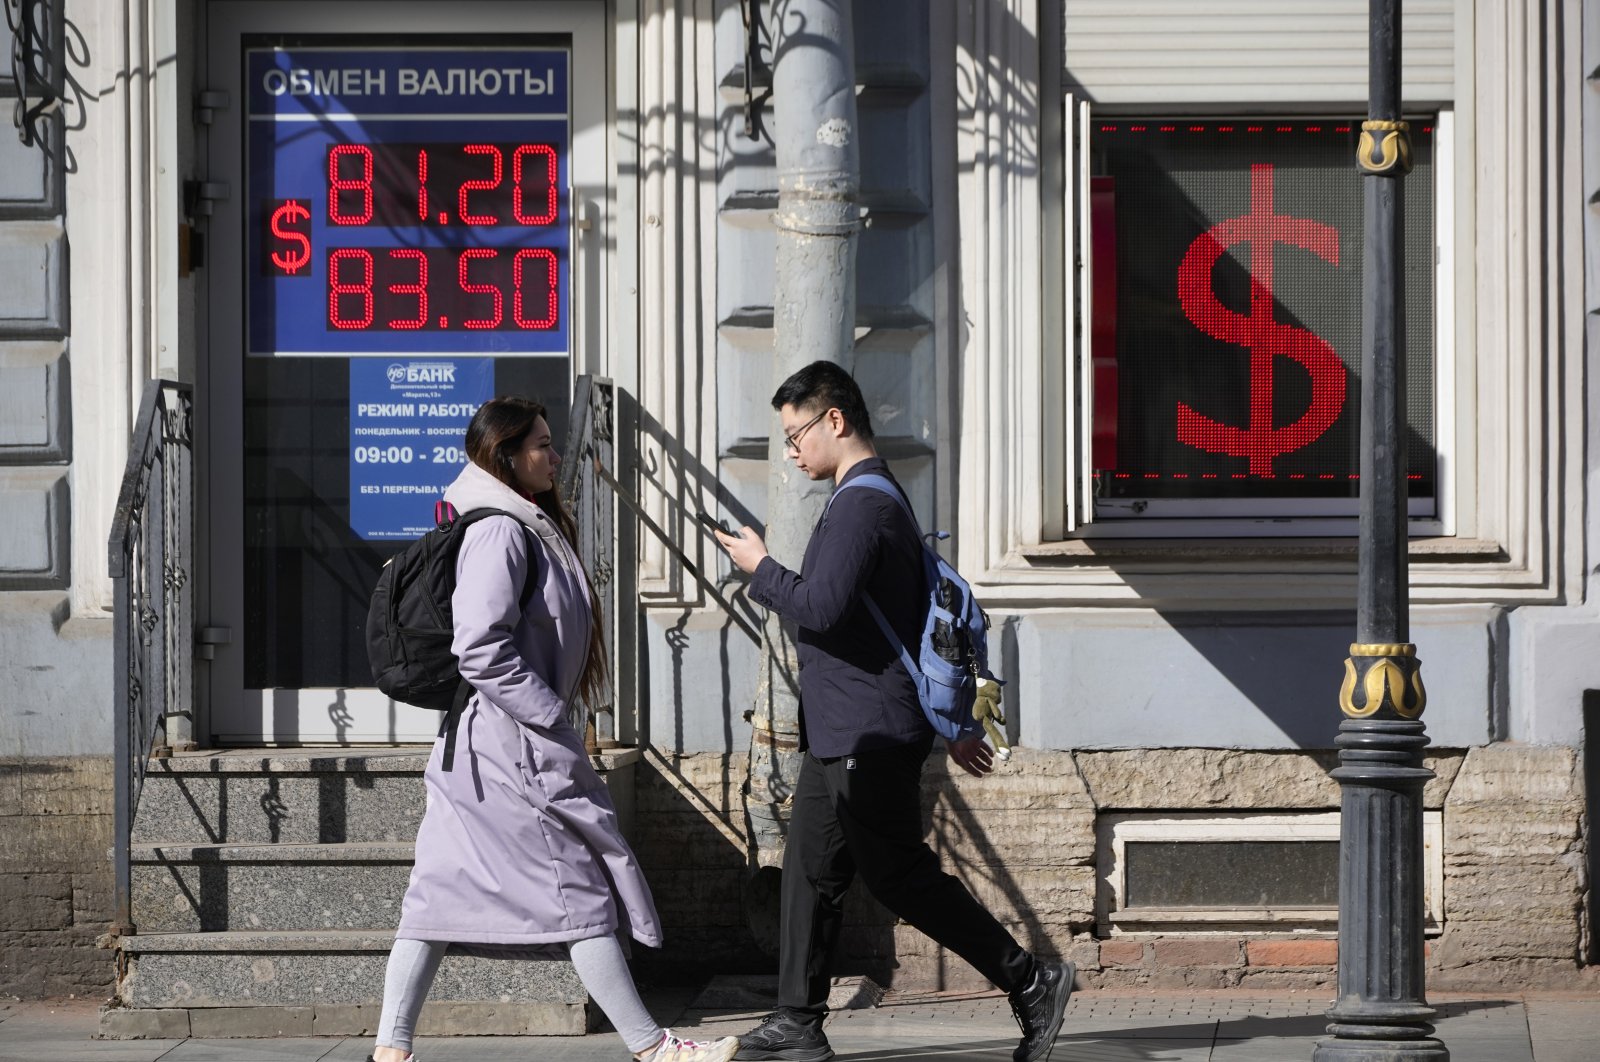 People walk past an exchange office screen showing the currency exchange rates of the U.S. dollar to the Russian ruble in St. Petersburg, Russia, April 7, 2023. (AP Photo)